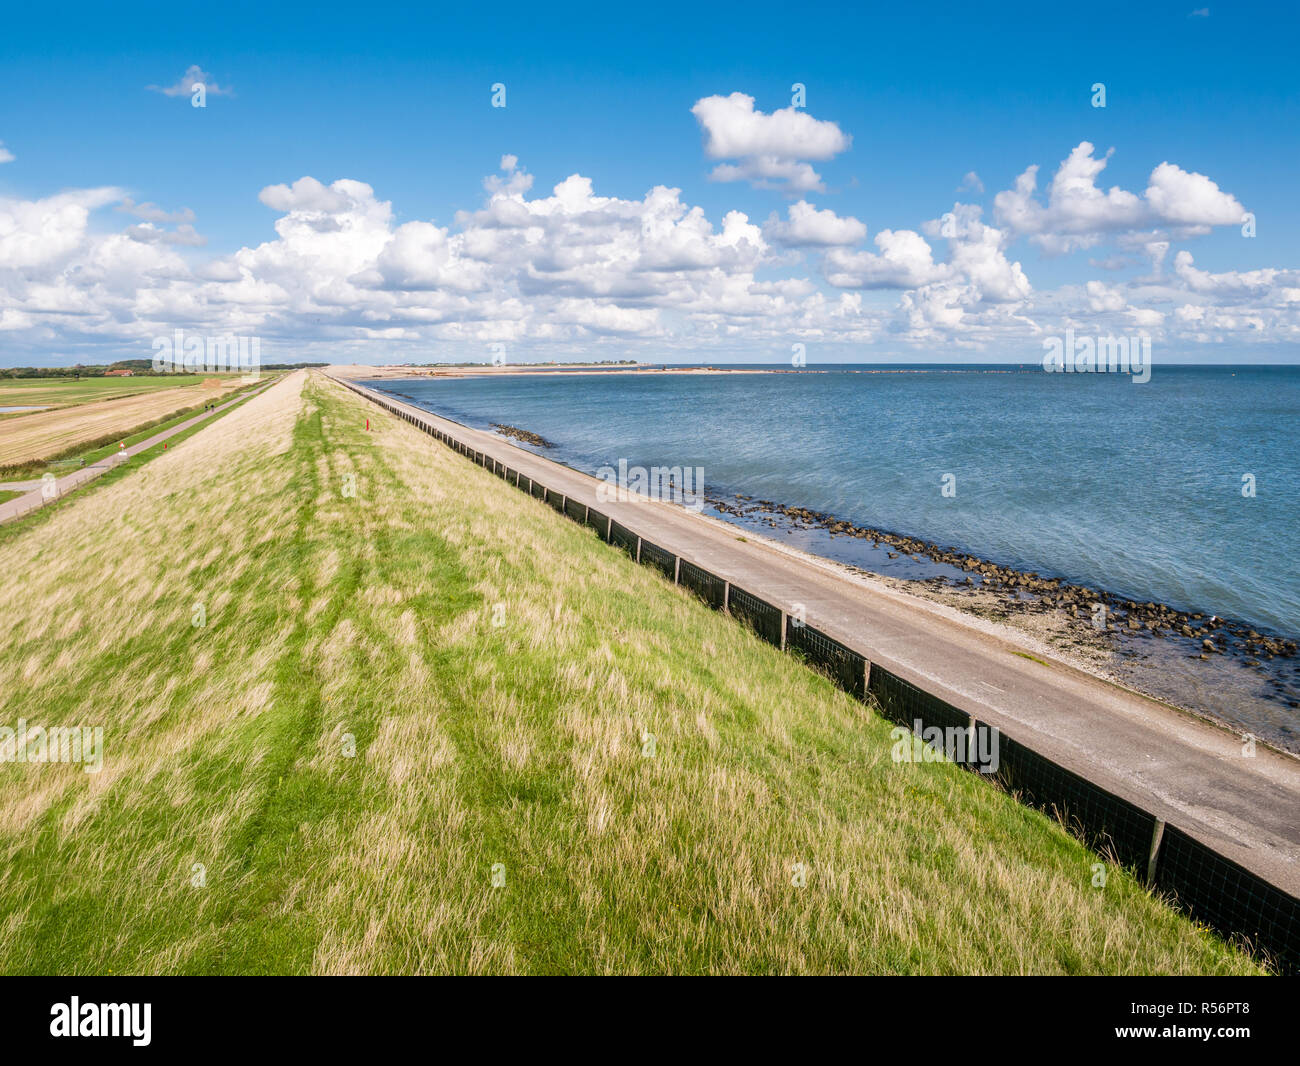 Dike with grass protecting polders on West Frisian island Texel against Wadden Sea, Netherlands Stock Photo